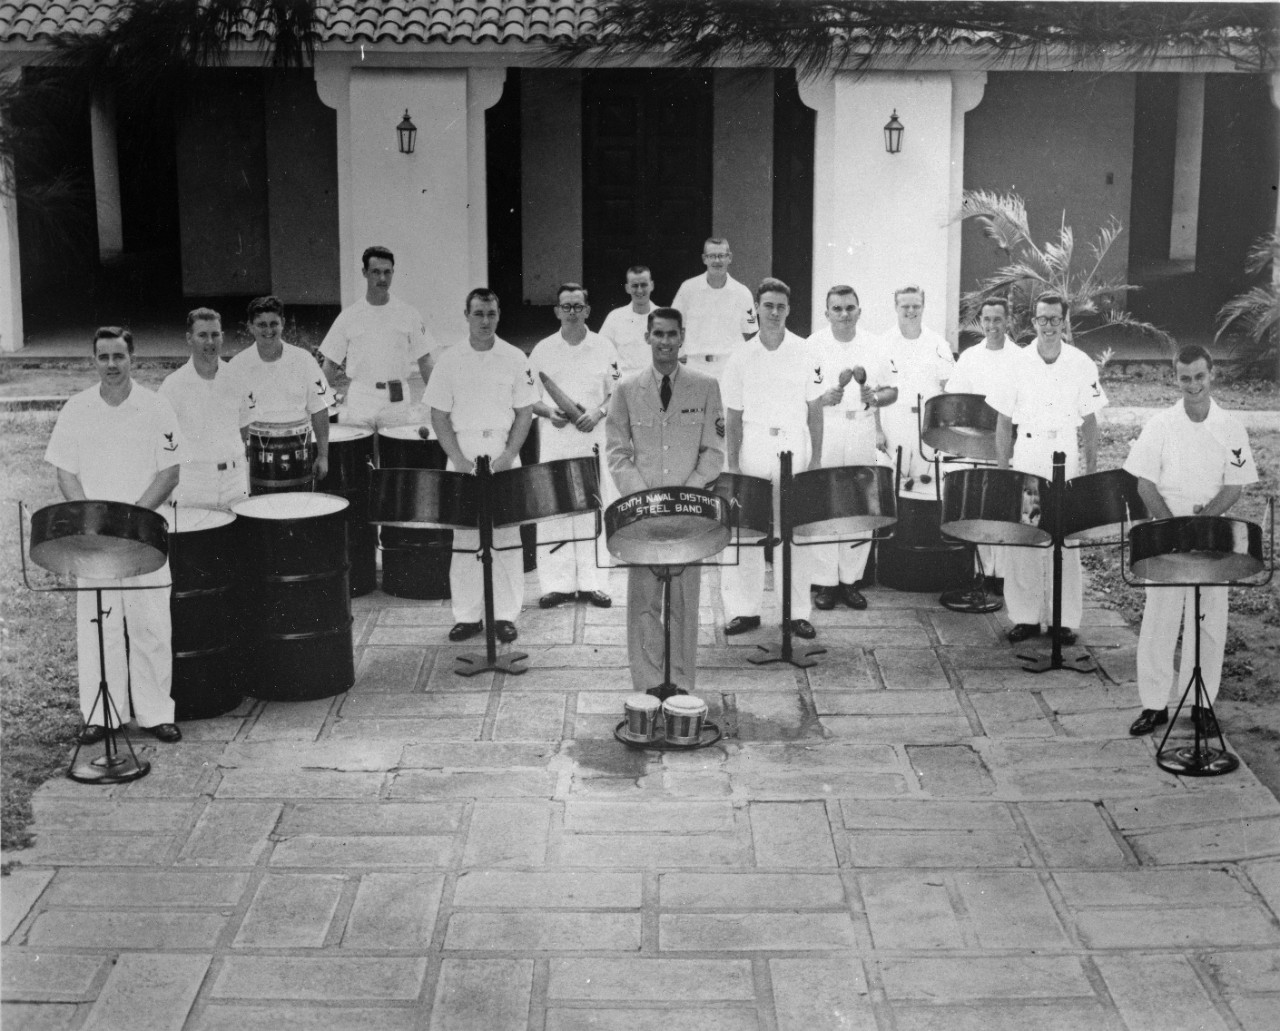 The Tenth Naval District Steel Band, organized in 1957 by Rear Admiral Daniel V. Gallery, former Commandant of the Tenth Naval District. Stationed in Puerto Rico, the steel bandsman learned their new art in Trinidad.